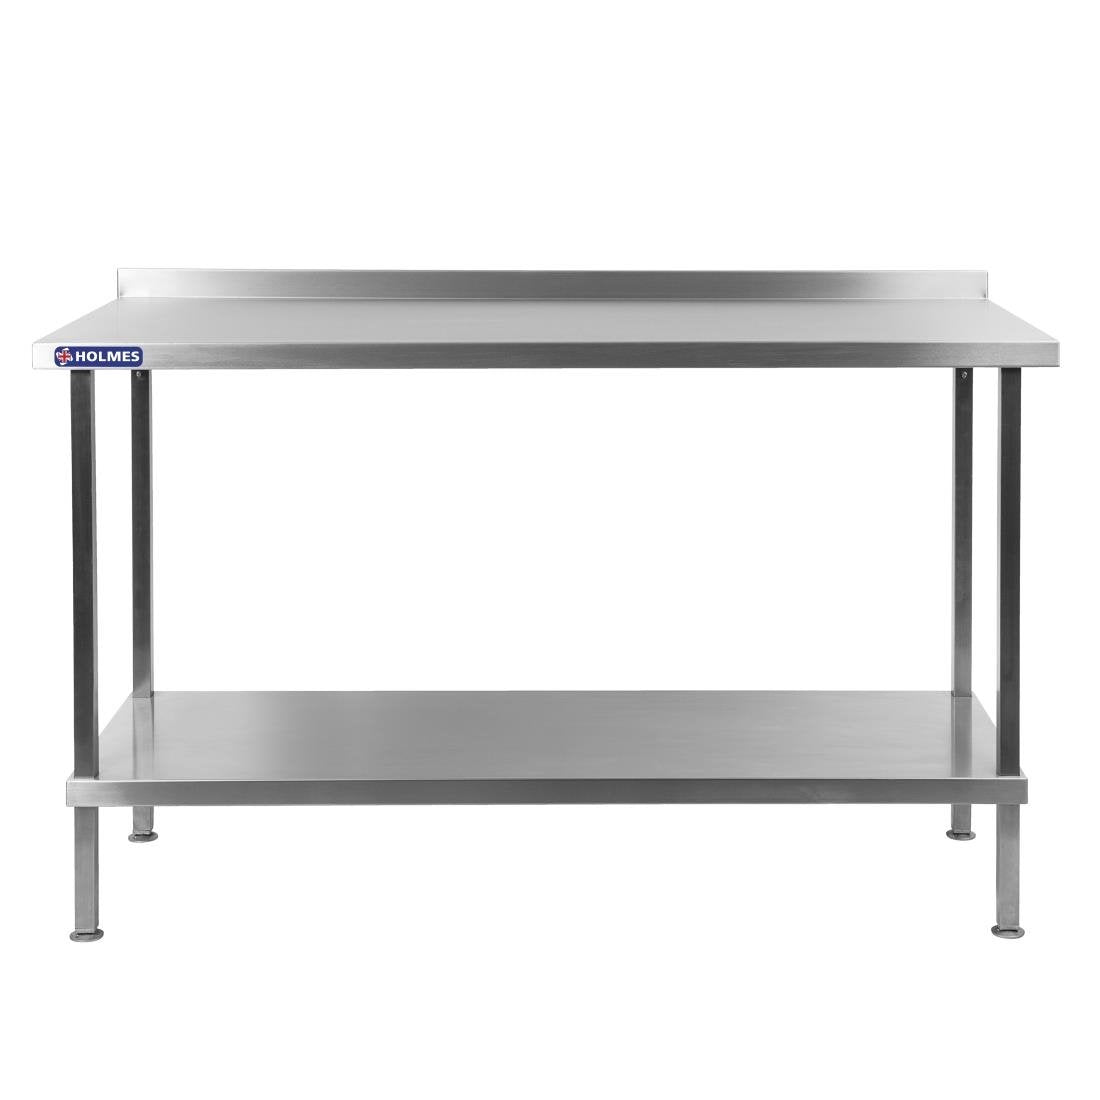 DR039 Holmes Stainless Steel Wall Table 2100mm JD Catering Equipment Solutions Ltd